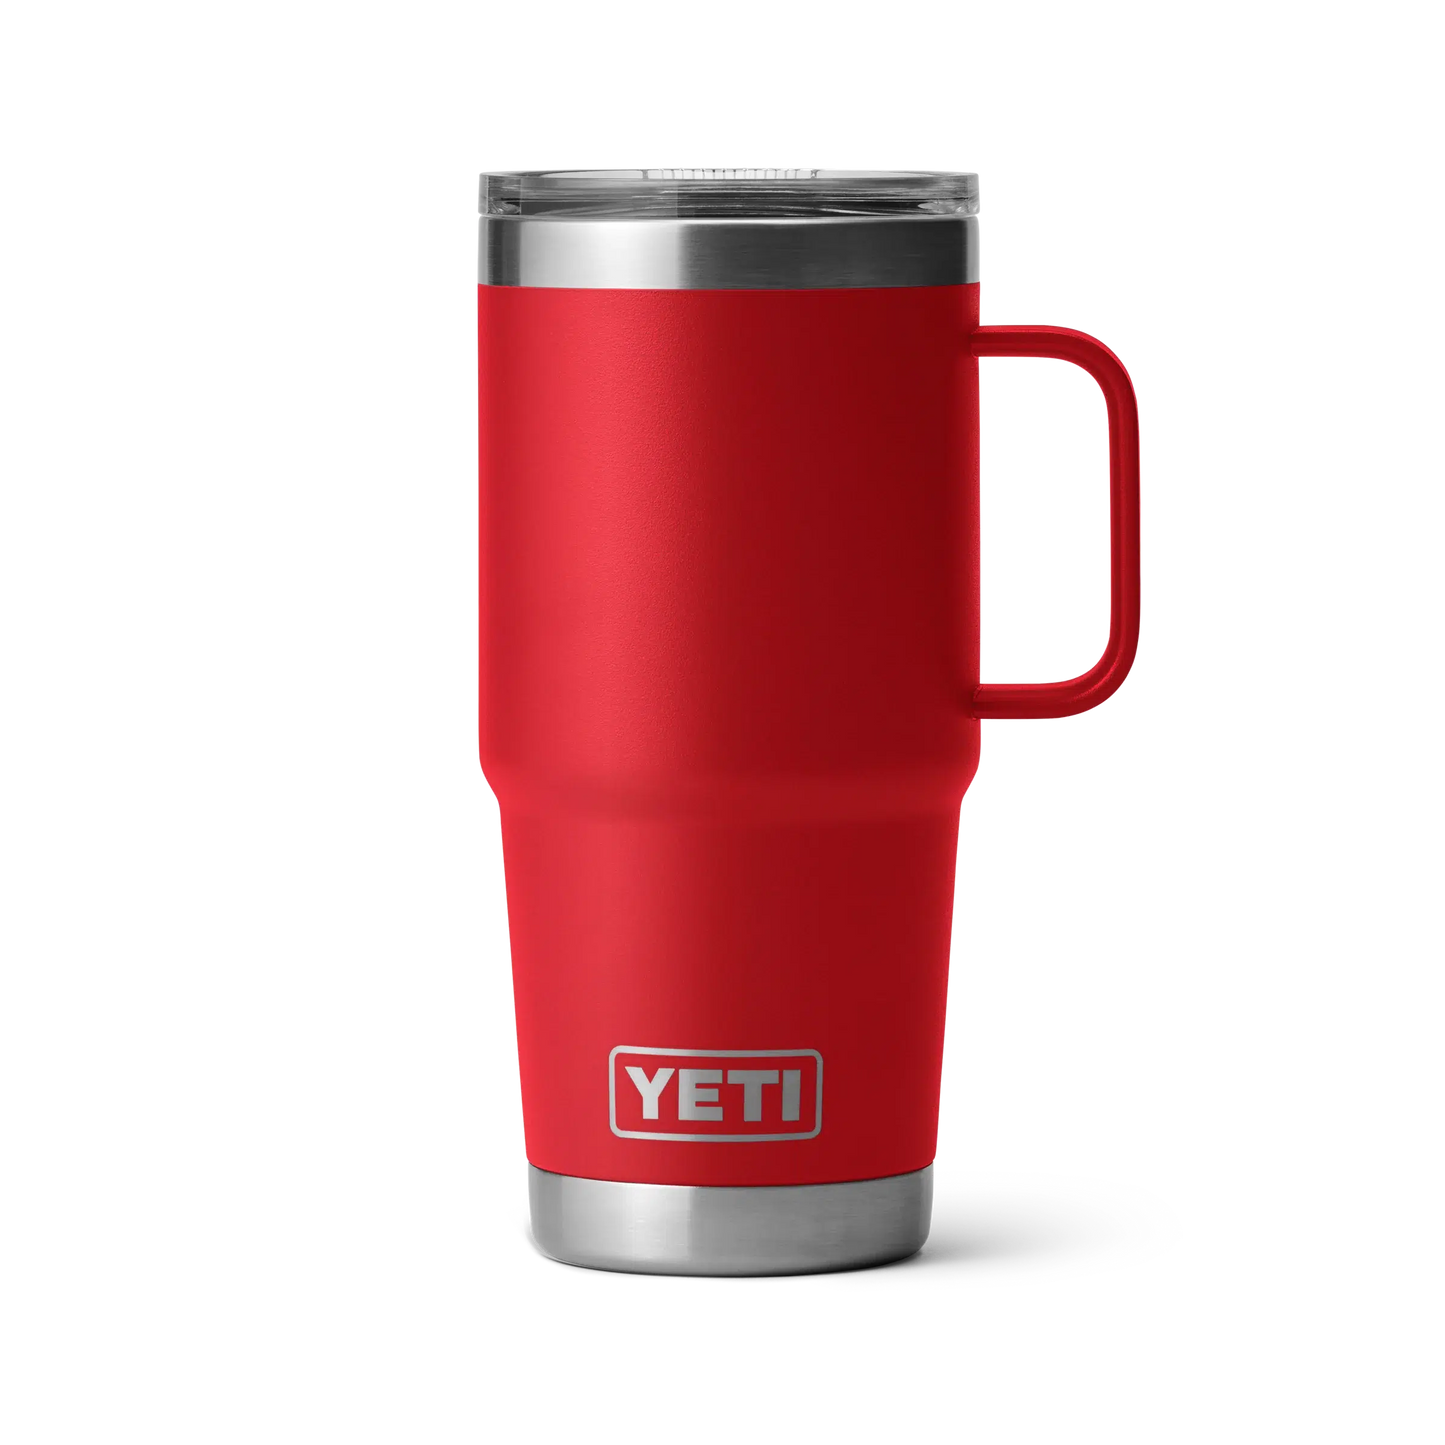 Yeti 20oz (591ml) Travel Mug with Stronghold Lid-Coolers & Drinkware-Yeti-Rescue Red-Fishing Station